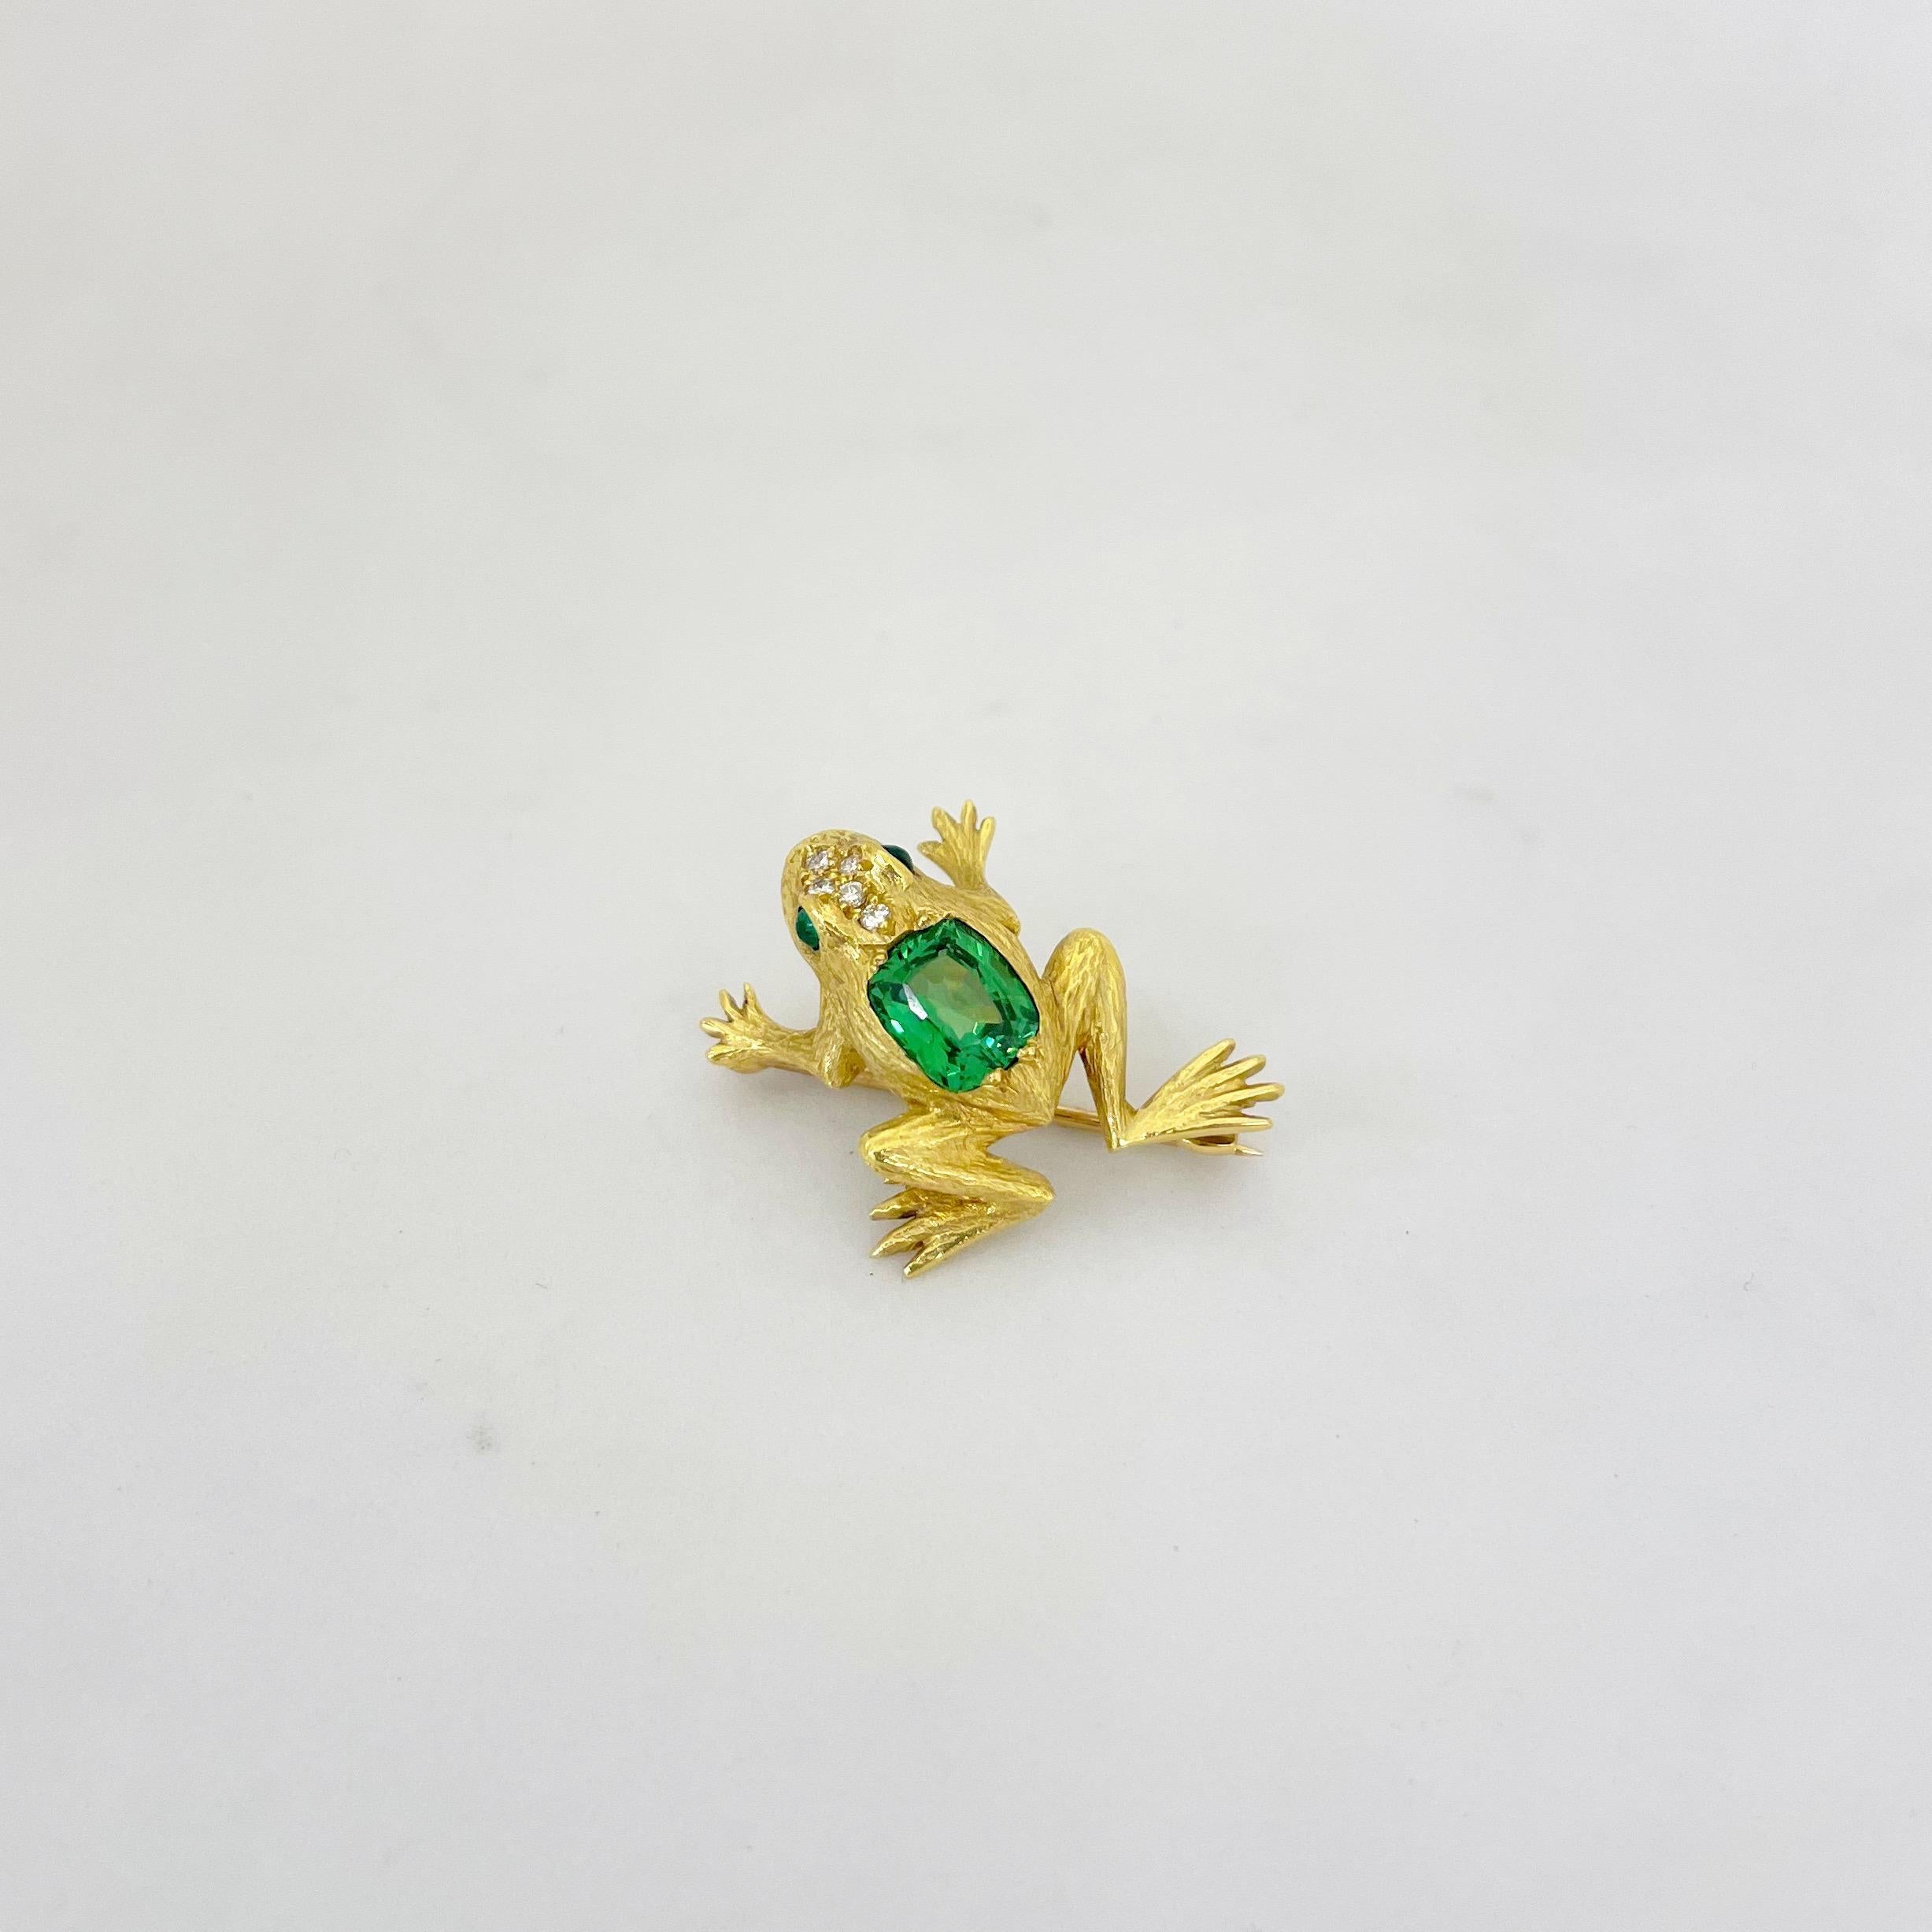 Contemporary 18KT Yellow Gold Frog Brooch with 1.86Ct. Green Tourmaline & 09.Ct. Diamonds